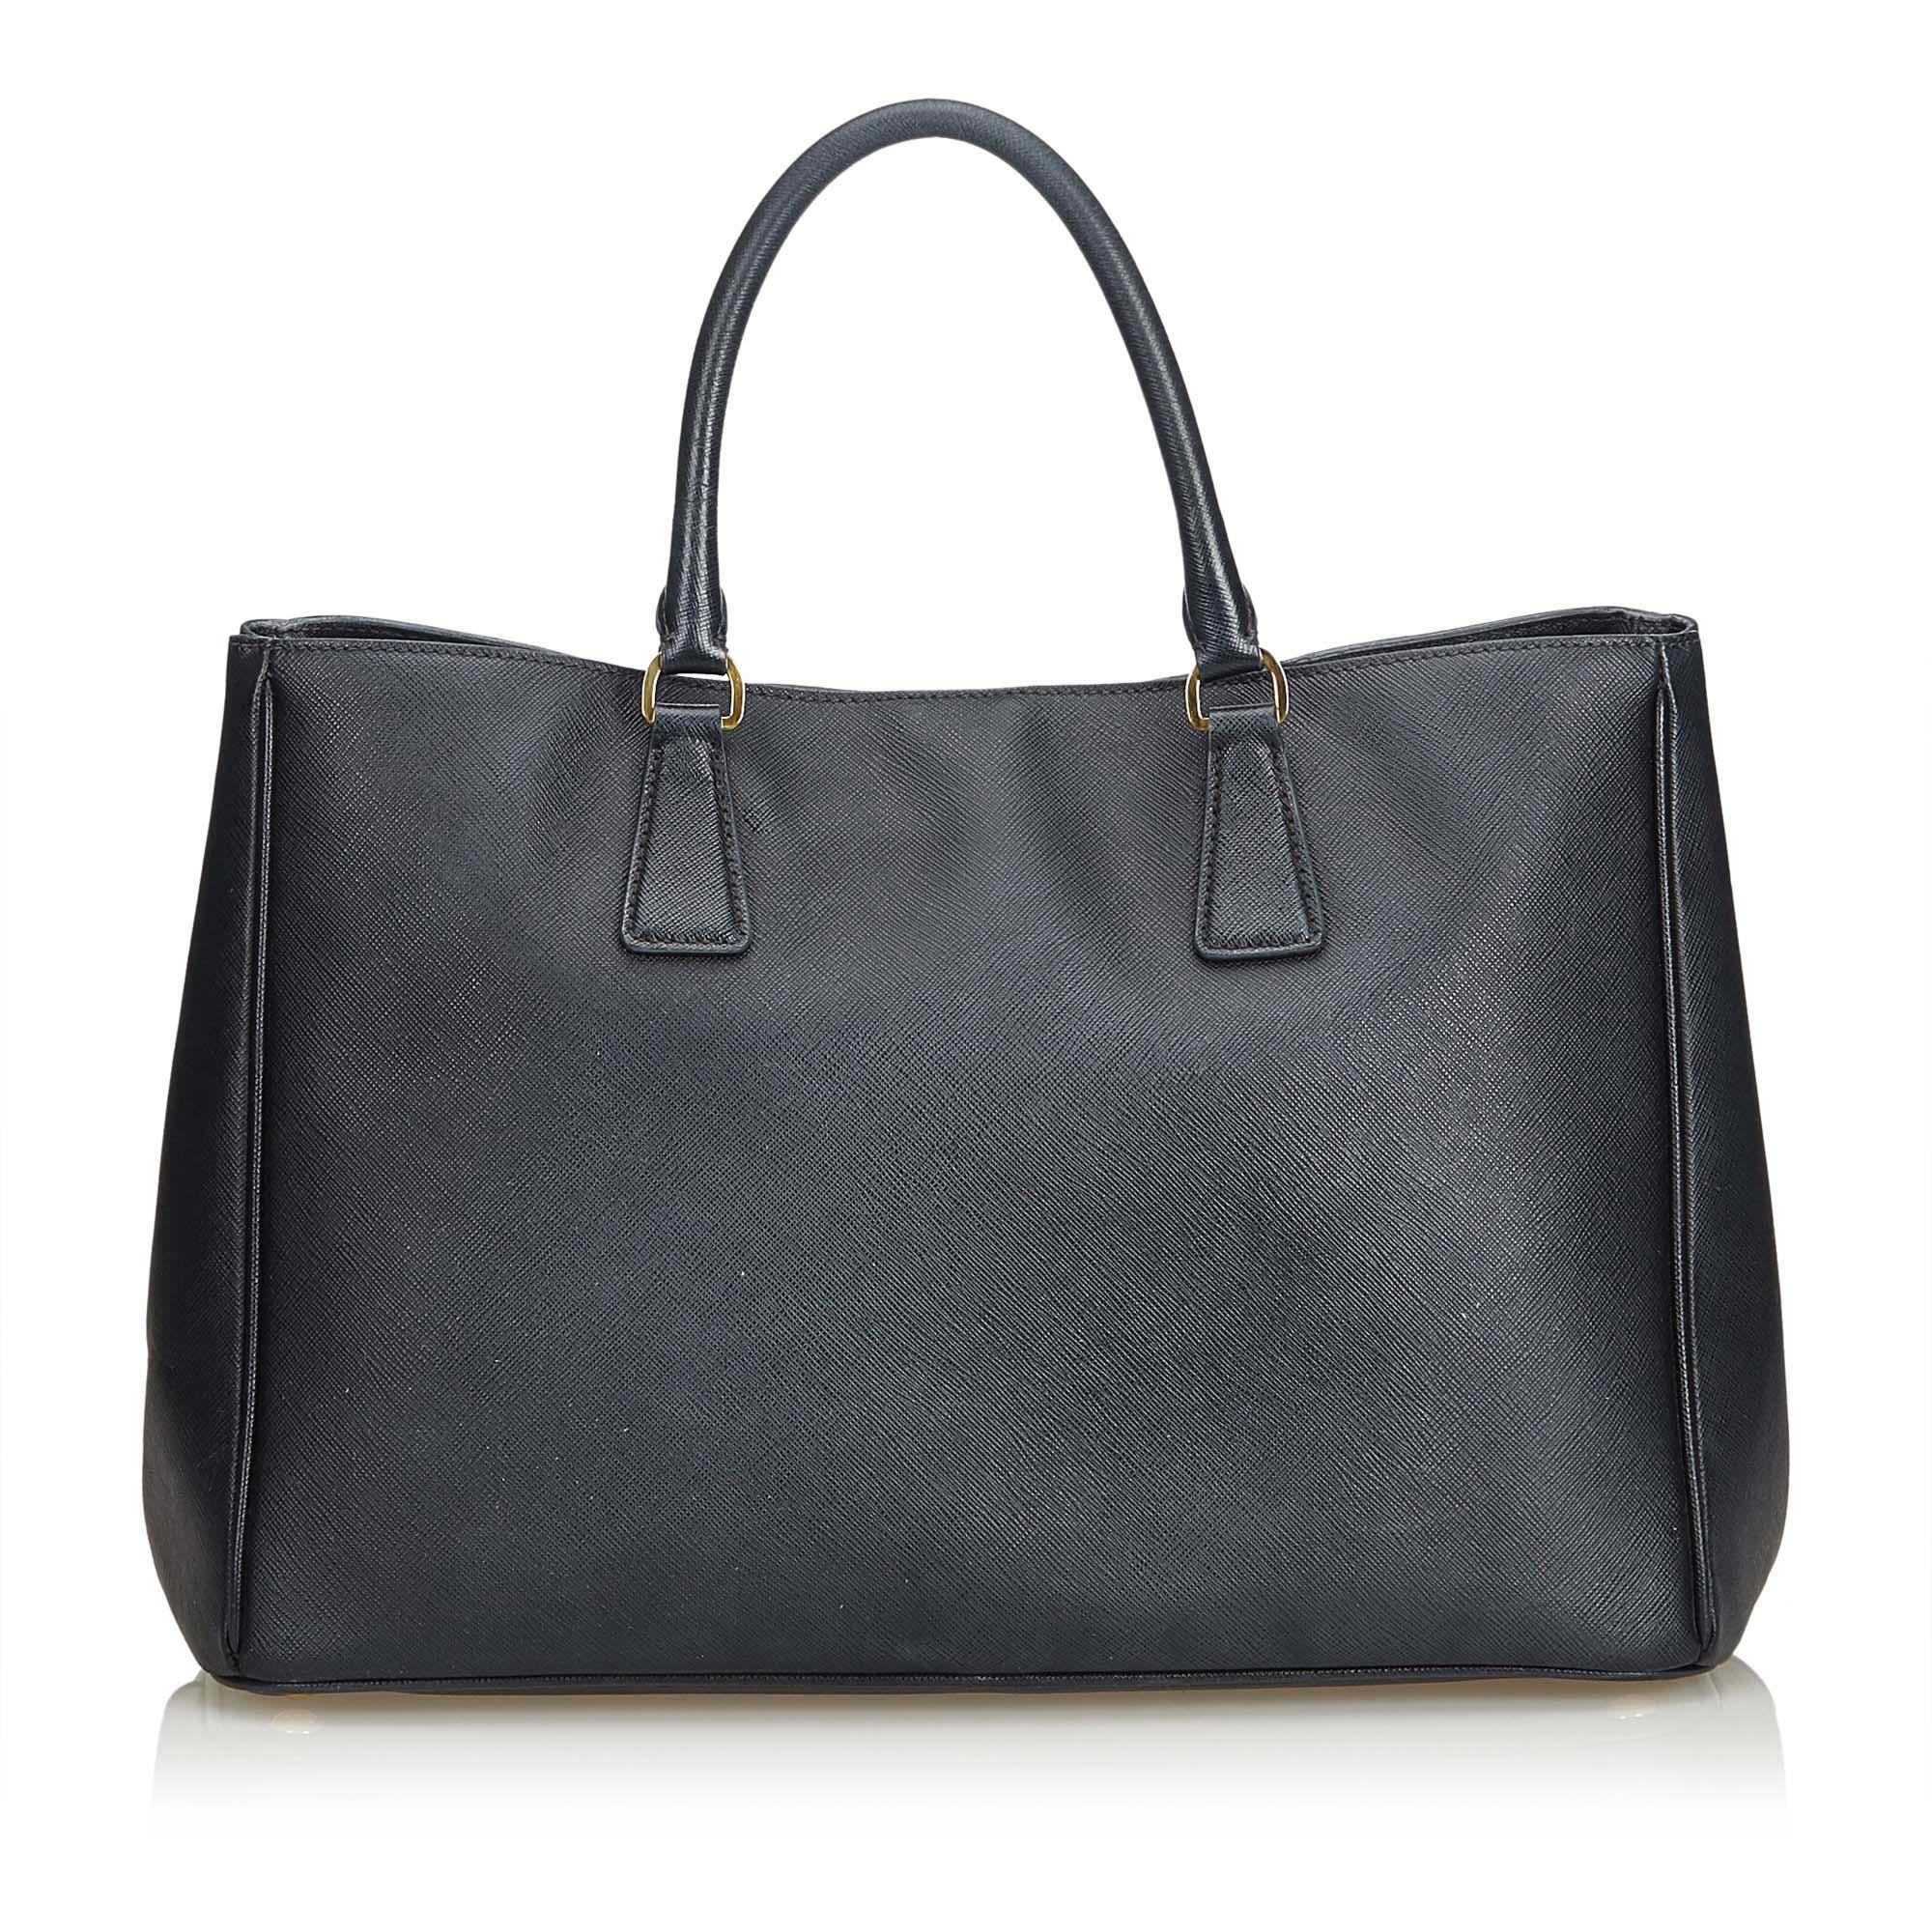 The Galleria handbag features a saffiano leather body, rolled handles, an open top with a magnetic snap button closure and interior zip and slip pockets. It carries as B+ condition rating.

Inclusions: 
Authenticity Card

Dimensions:
Length: 27.00